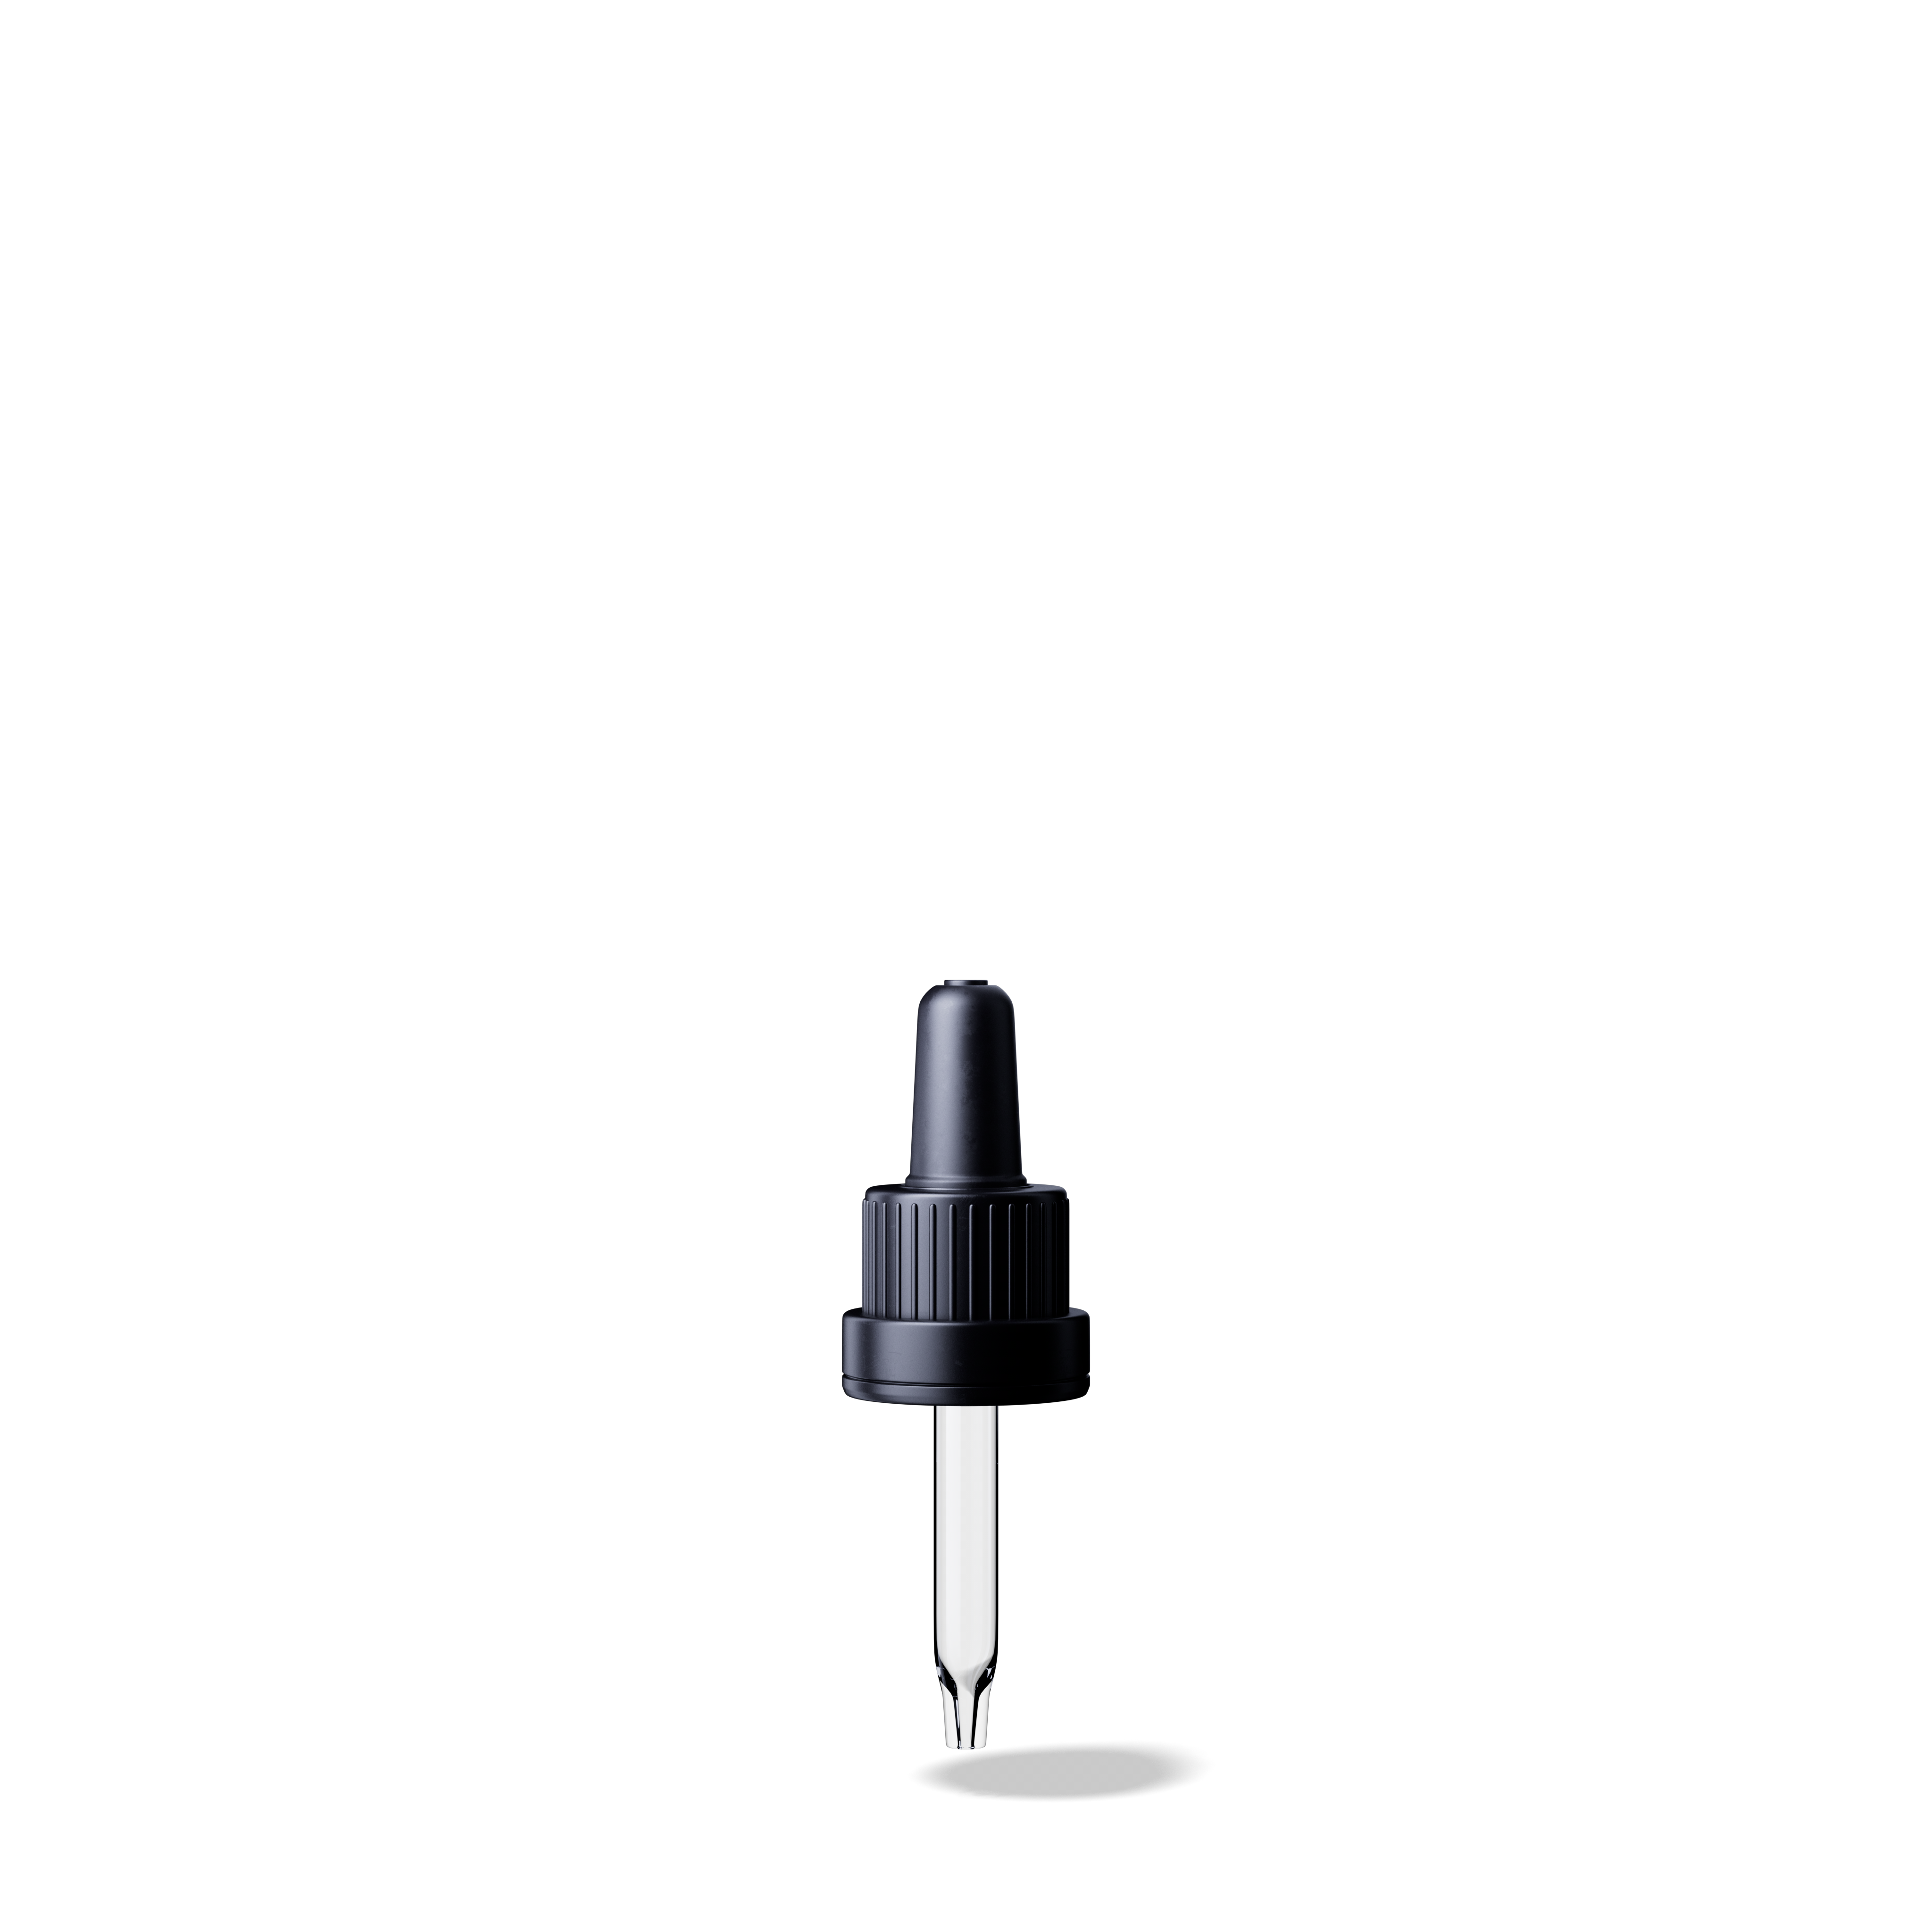 Pipette tamper evident DIN18, III, black, ribbed, bulb TPE, dose 0.7ml, conical tip (Orion 5)